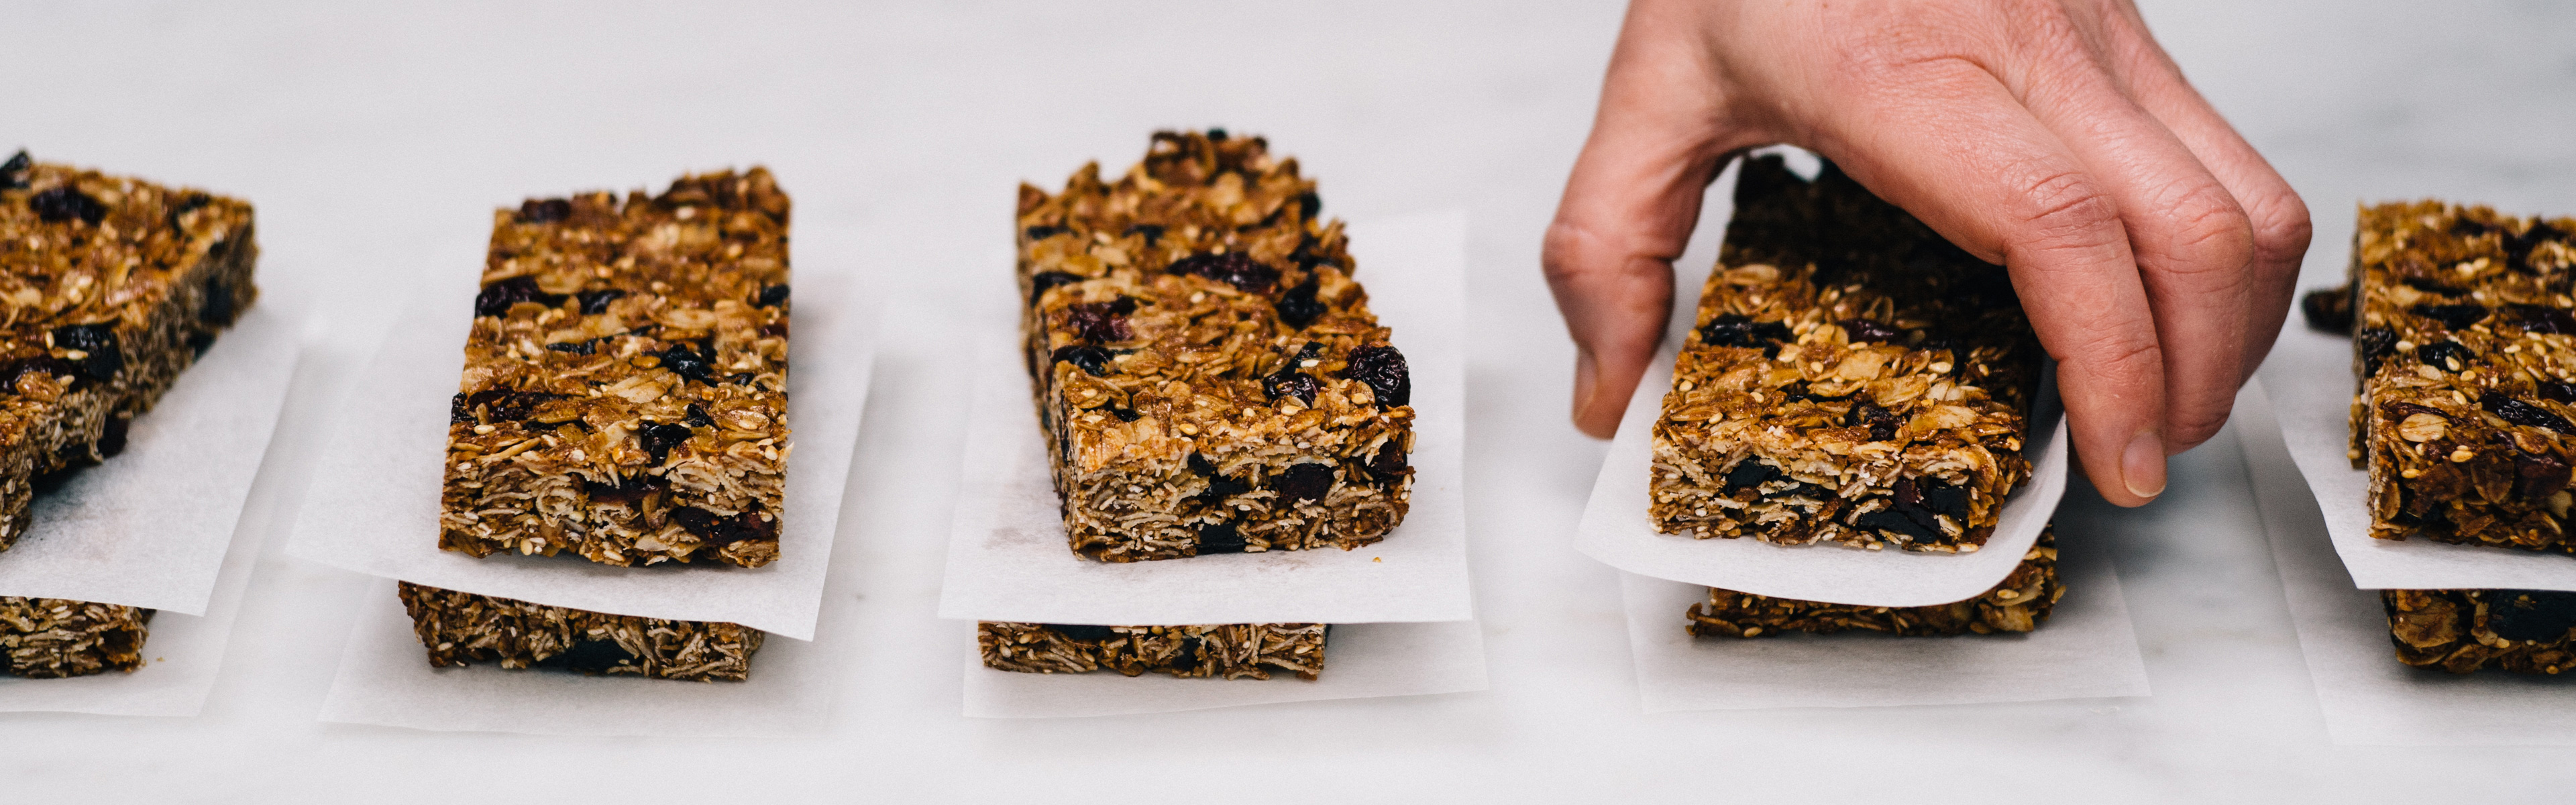 Flaxseed meal packs these classic granola bars with nutrition while prune juice concentrate, diced prunes, coconut, and sesame seeds add great flavor.